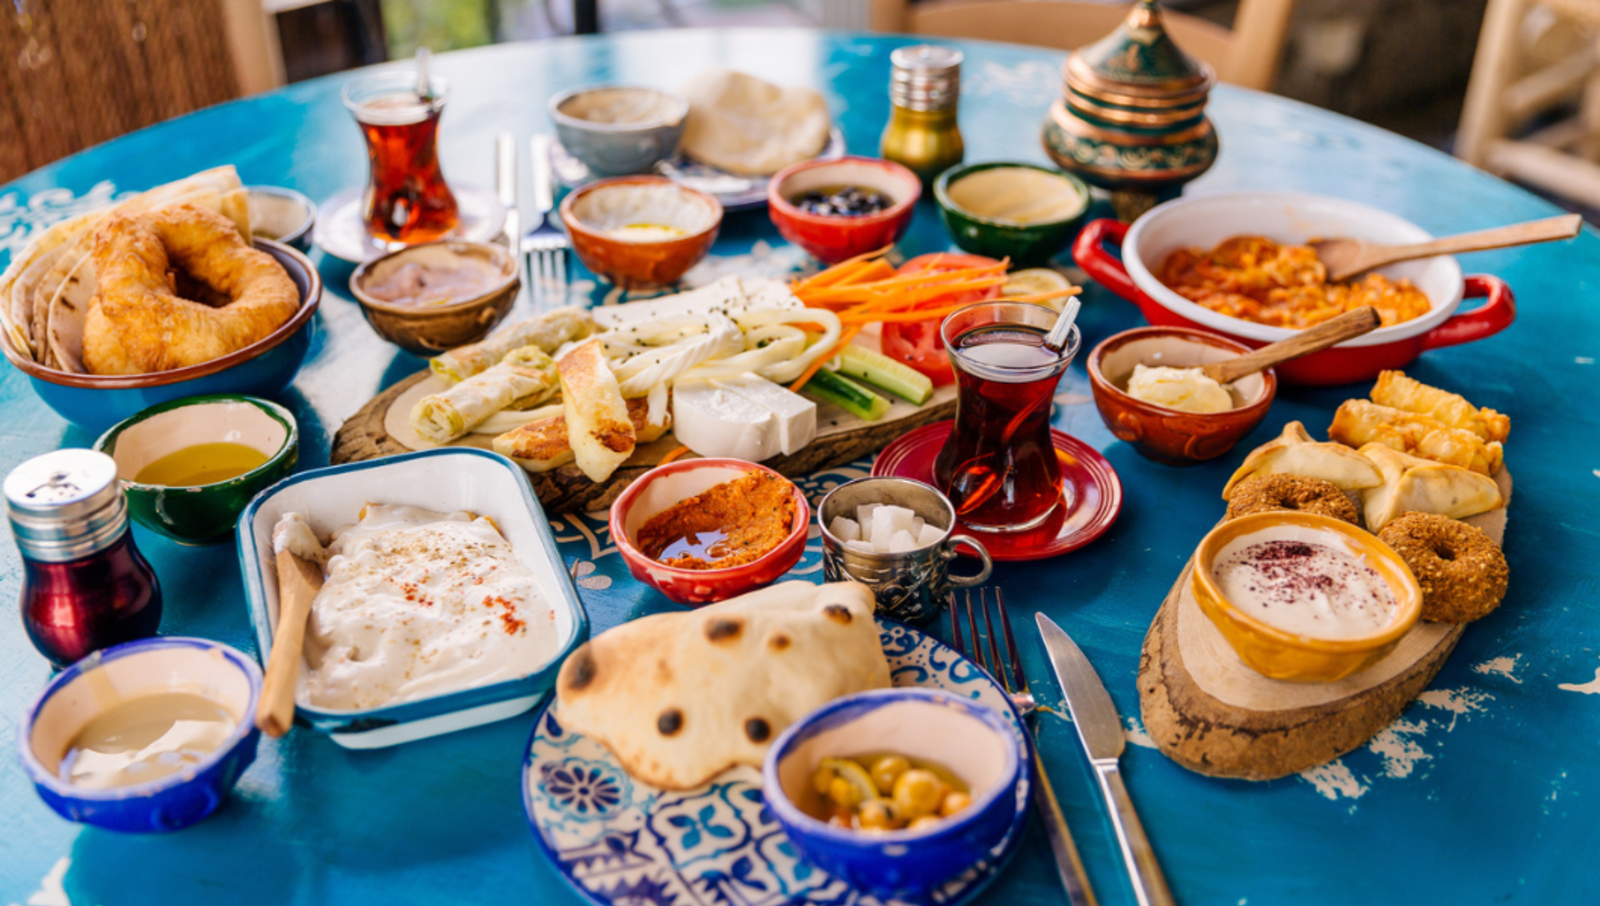 spread of dips, bread, cheese, vegetables, and tea on table in turkey